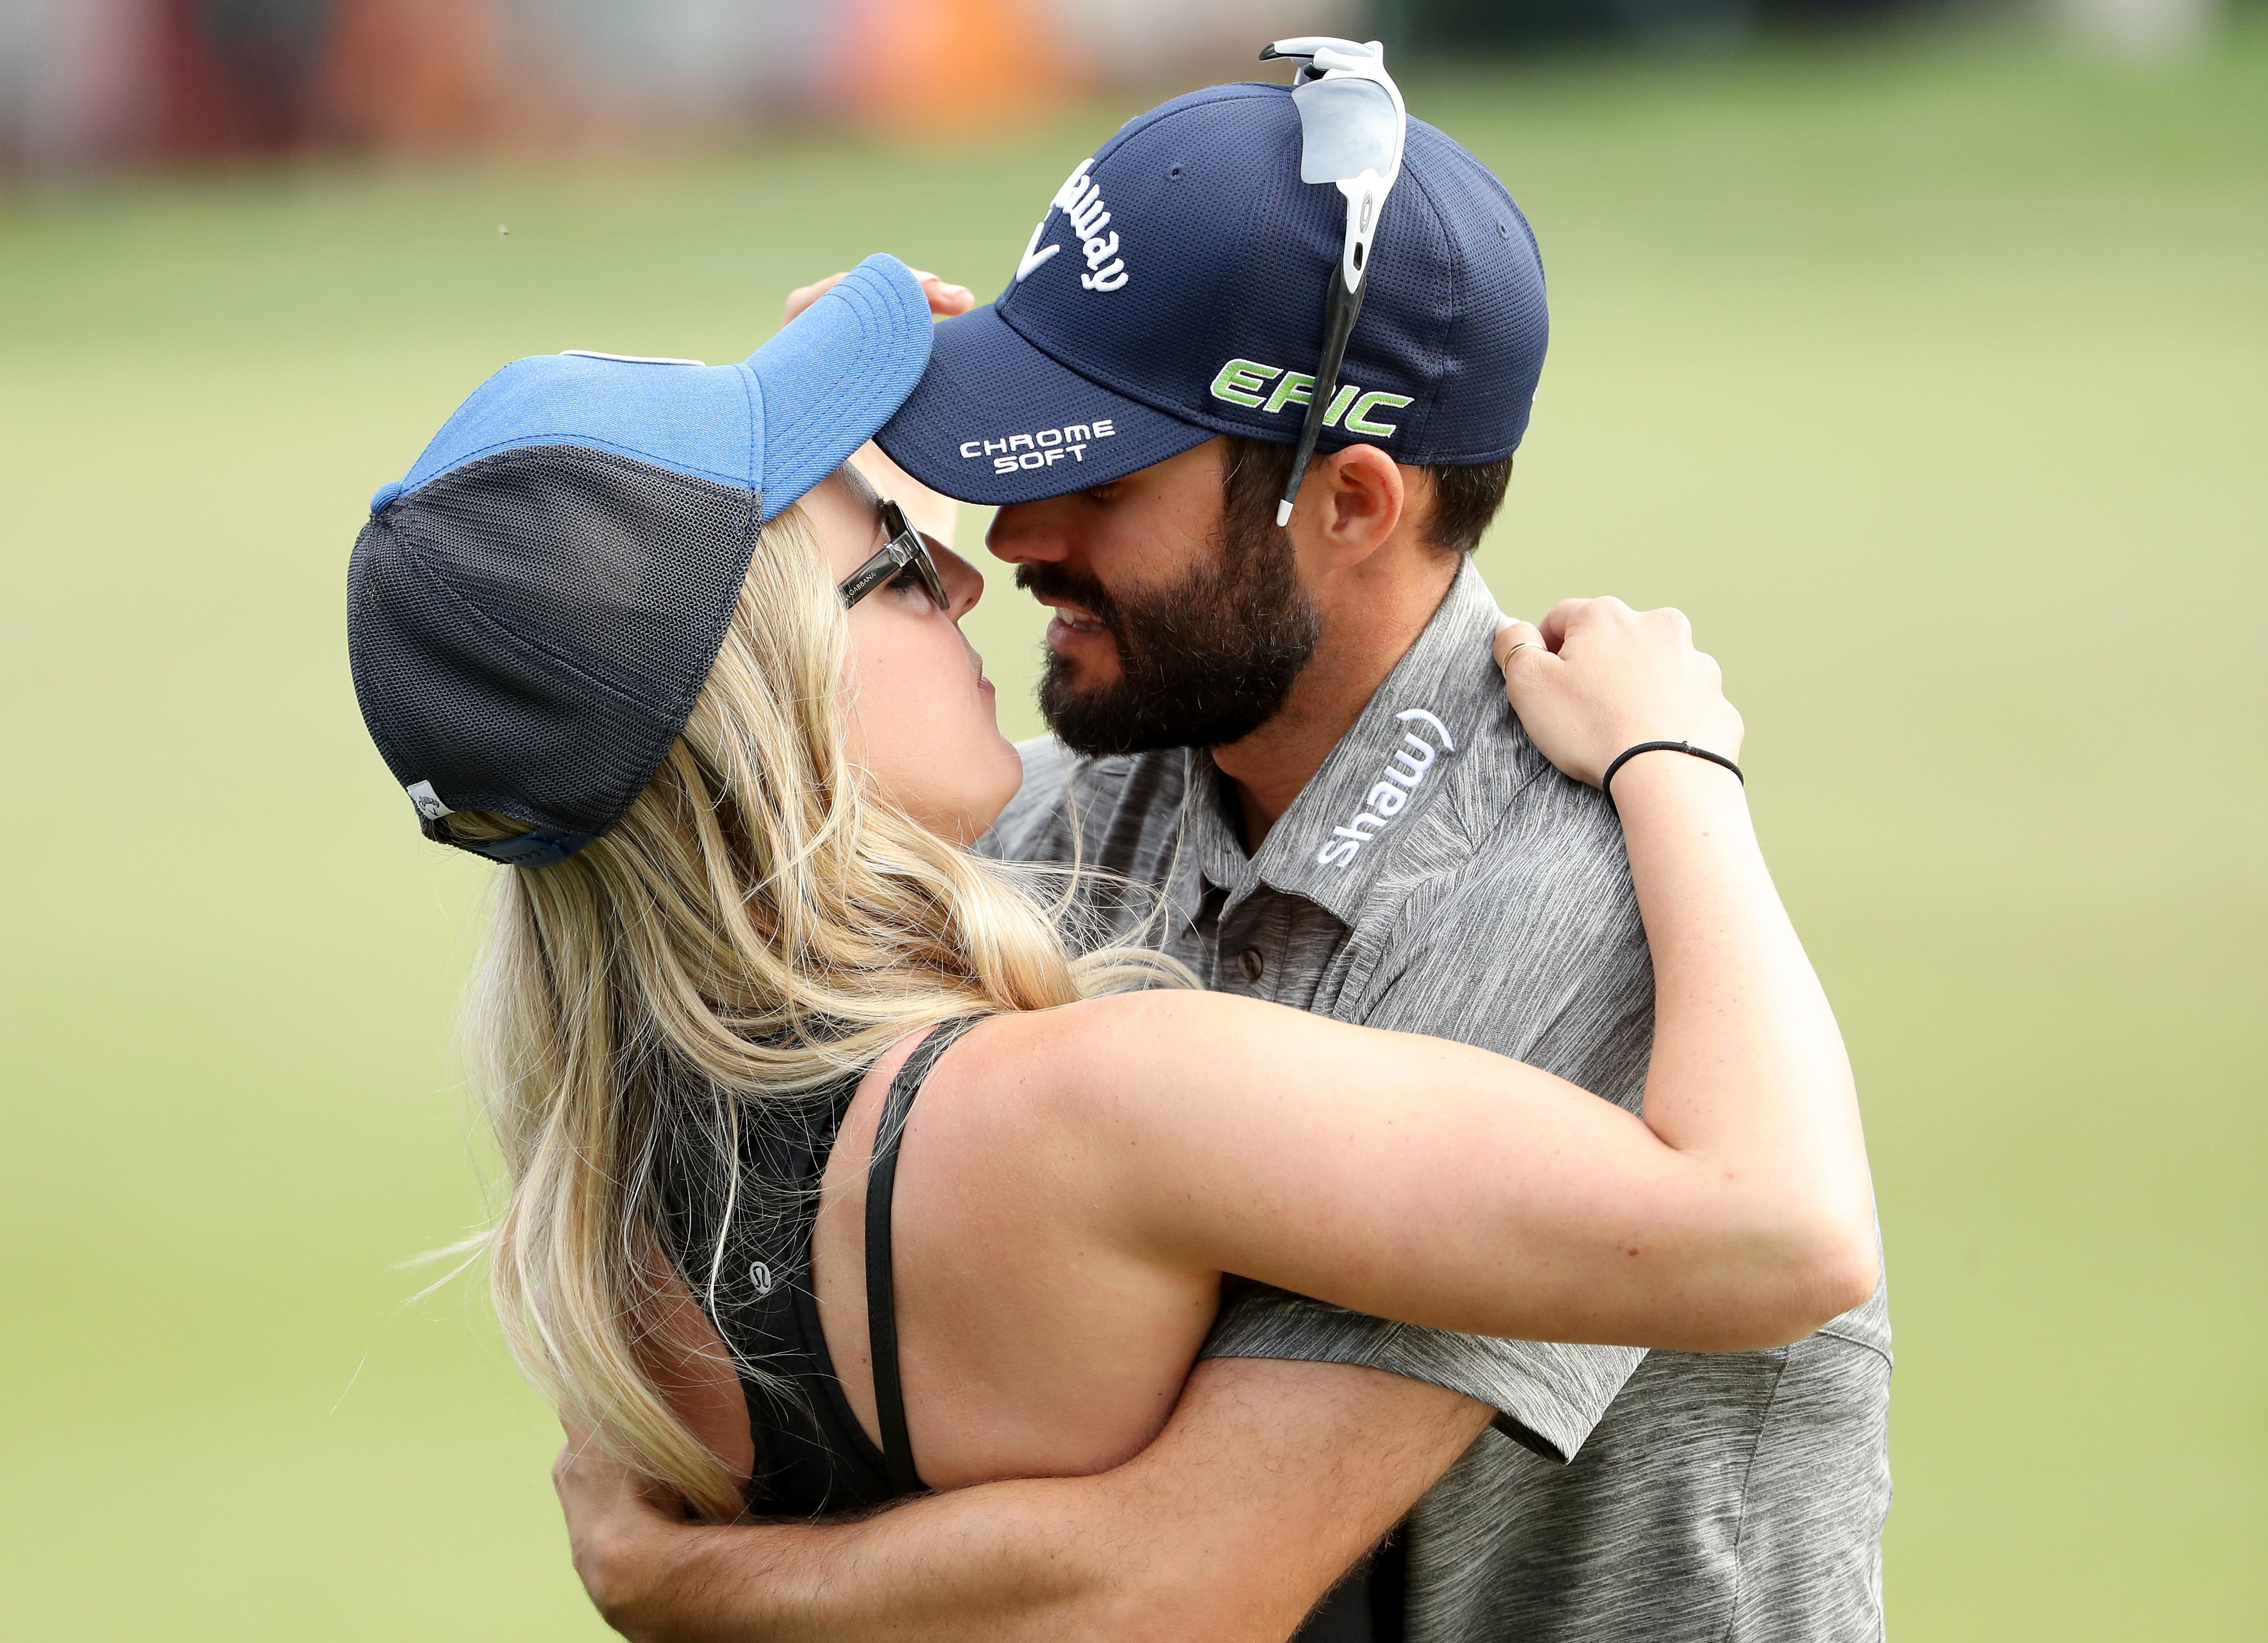 Another PGA Tour pro is deep in the doghouse after commenting on his wifes outfit This is the Loop GolfDigest image